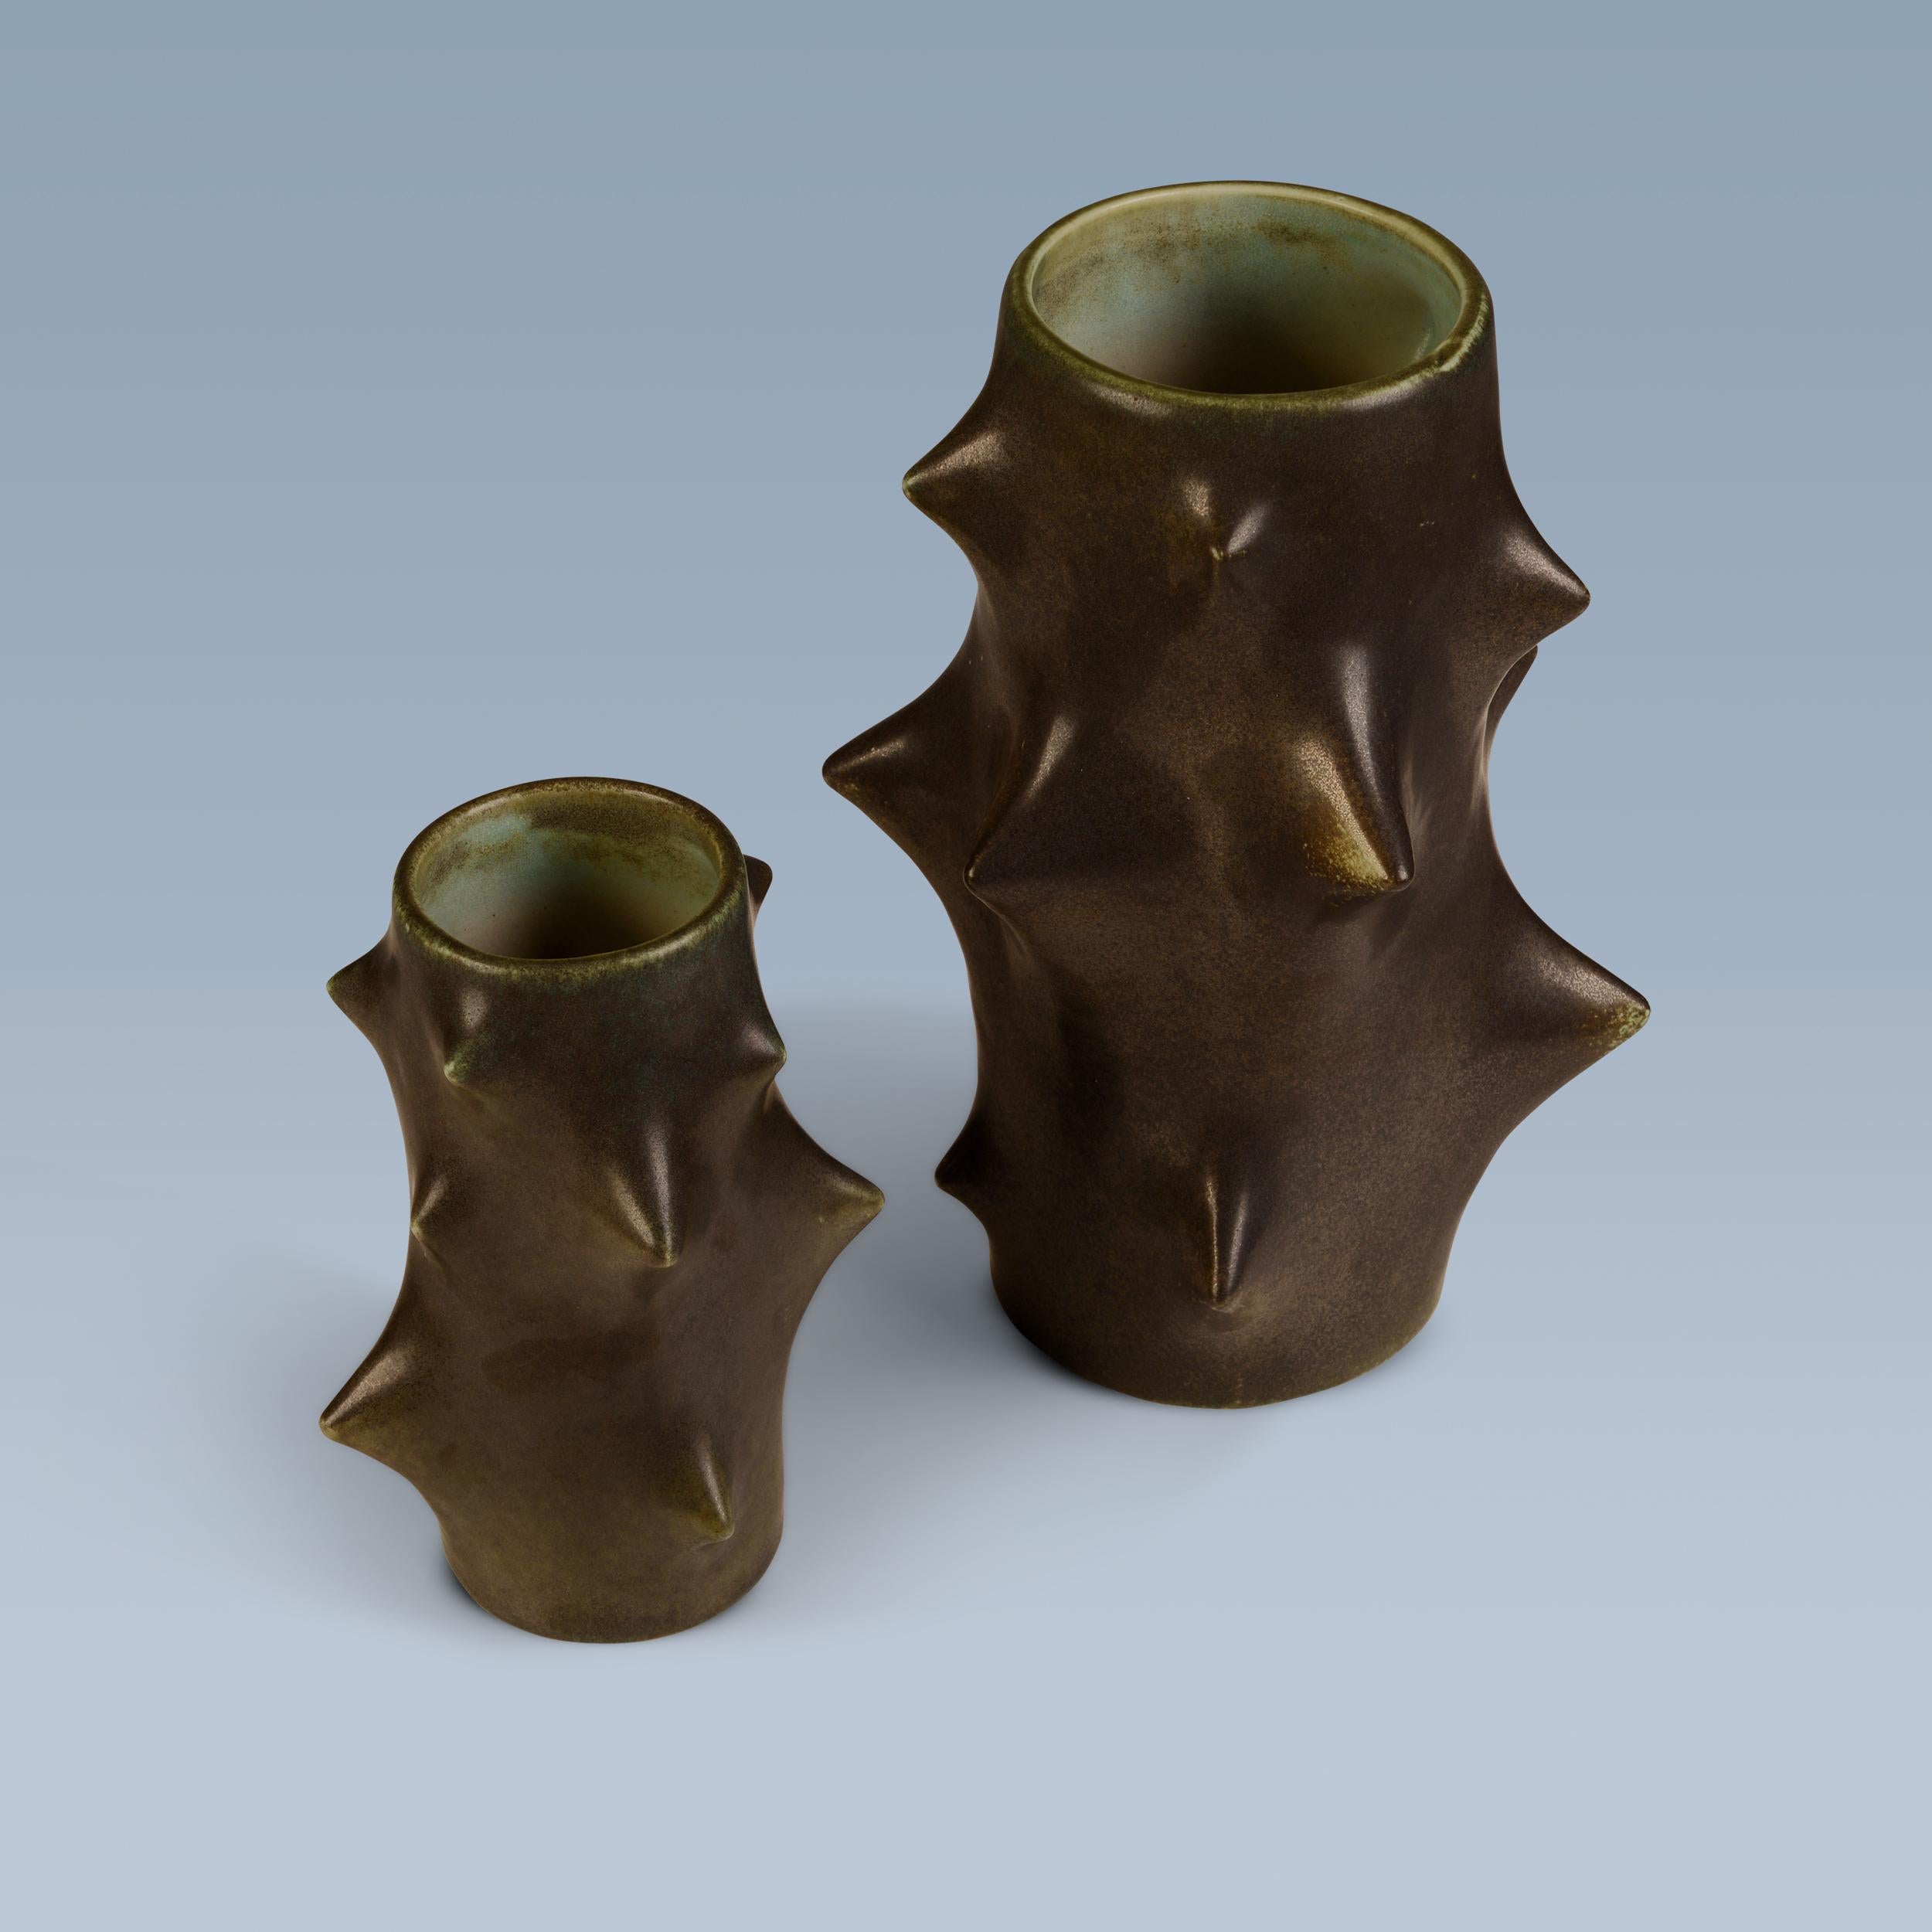 This set of two ‘Rosentorn’ / rose thorn vases are designed by Knud Basse (1916-1991). They have a cactus-like shape and are decorated with dark-greenish glaze.

Made and marked by Michael Andersen & Son, Bornholm. Denmark.

Signed with artist